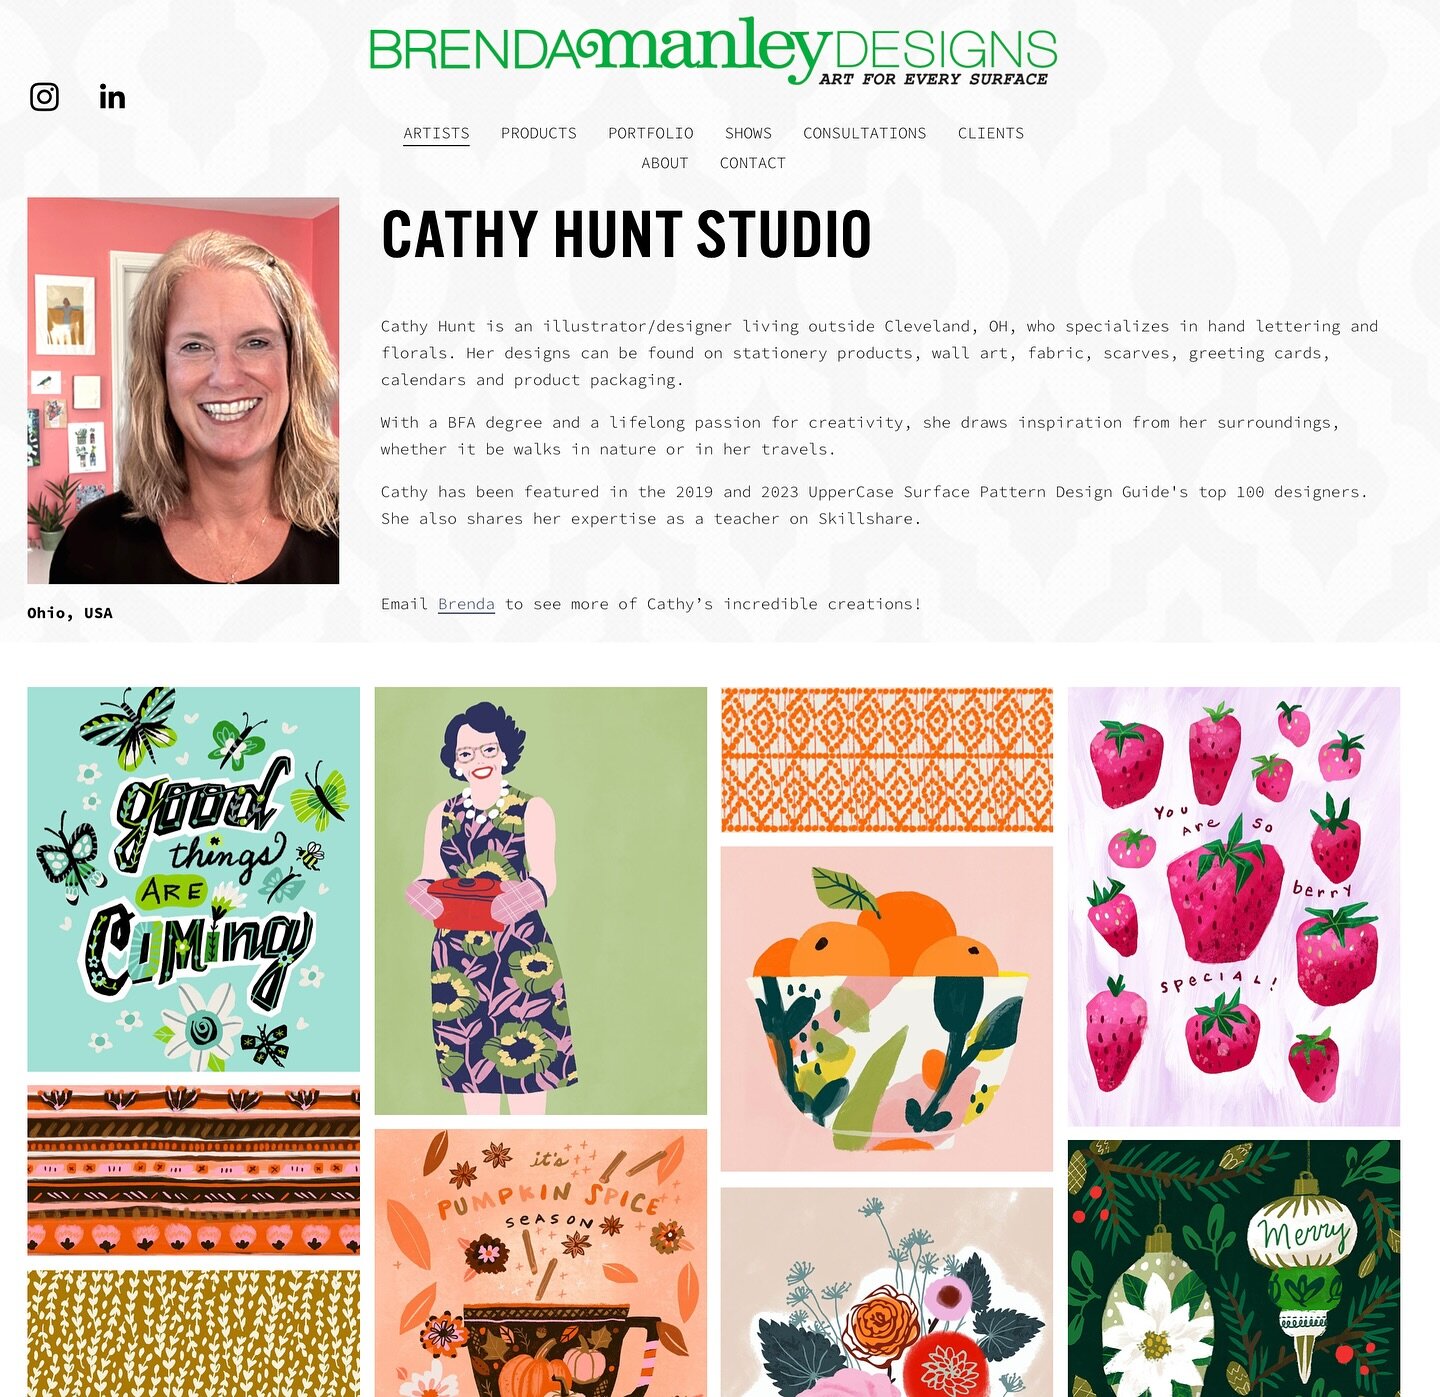 I am excited to announce that I will be represented by @brenda_manley_designs ! Looking forward to working together Brenda!
-
#brendamanleydesigns #cathyhunt #surfacedesign #surfacepatterndesign #greetingcards #greetingcarddesign #lettering #handlett